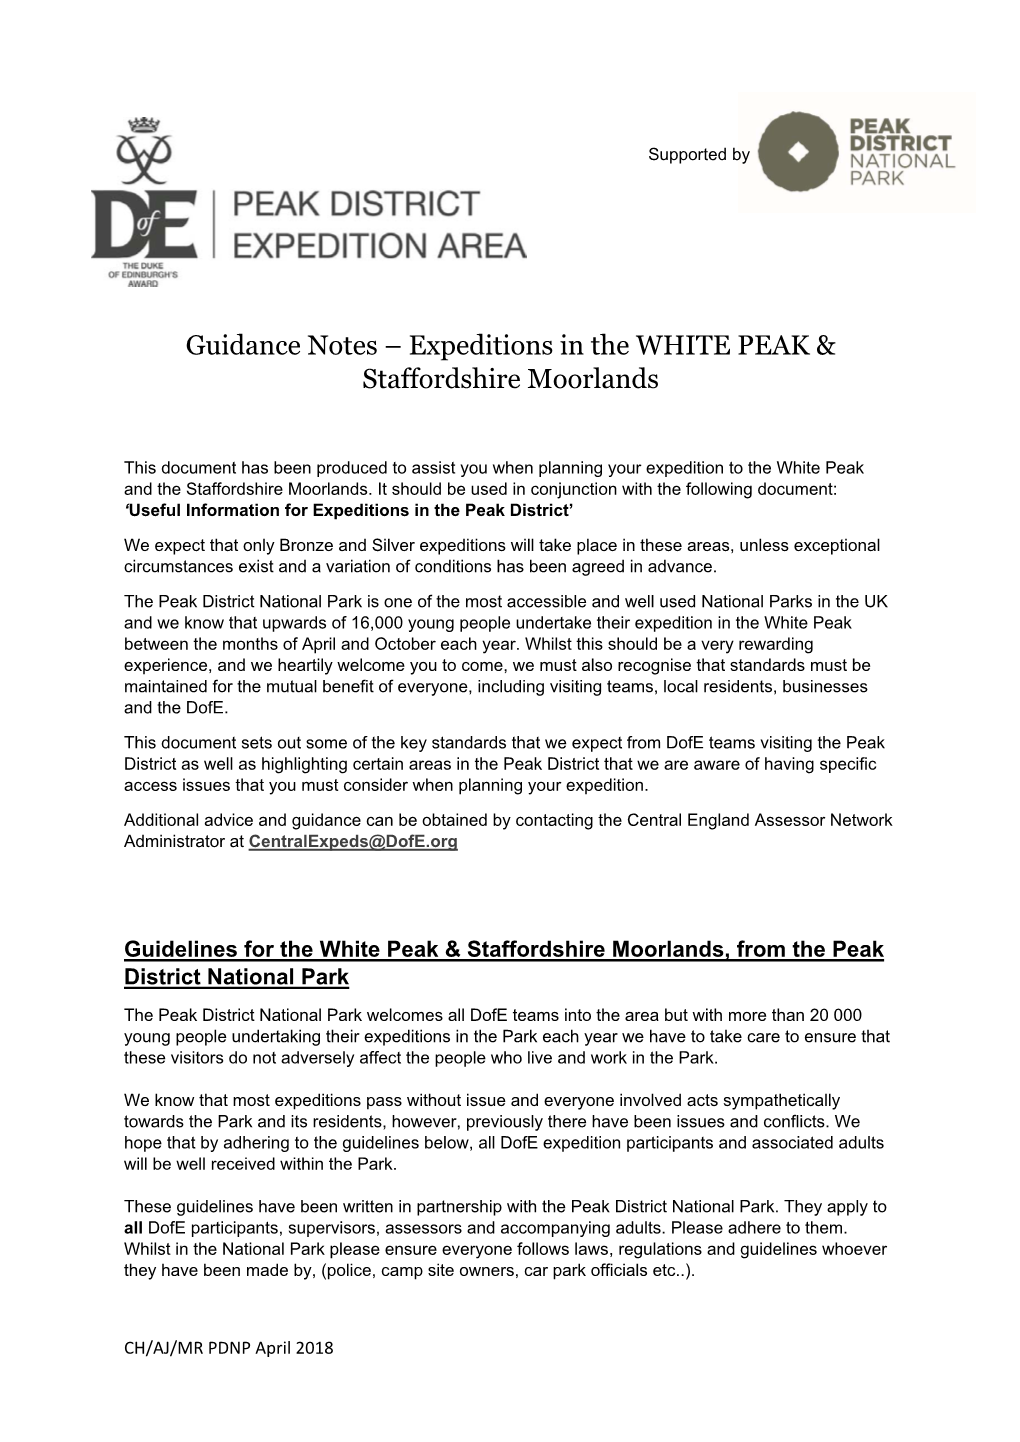 Guidance Notes White Peak and Staffordshire Moorlands